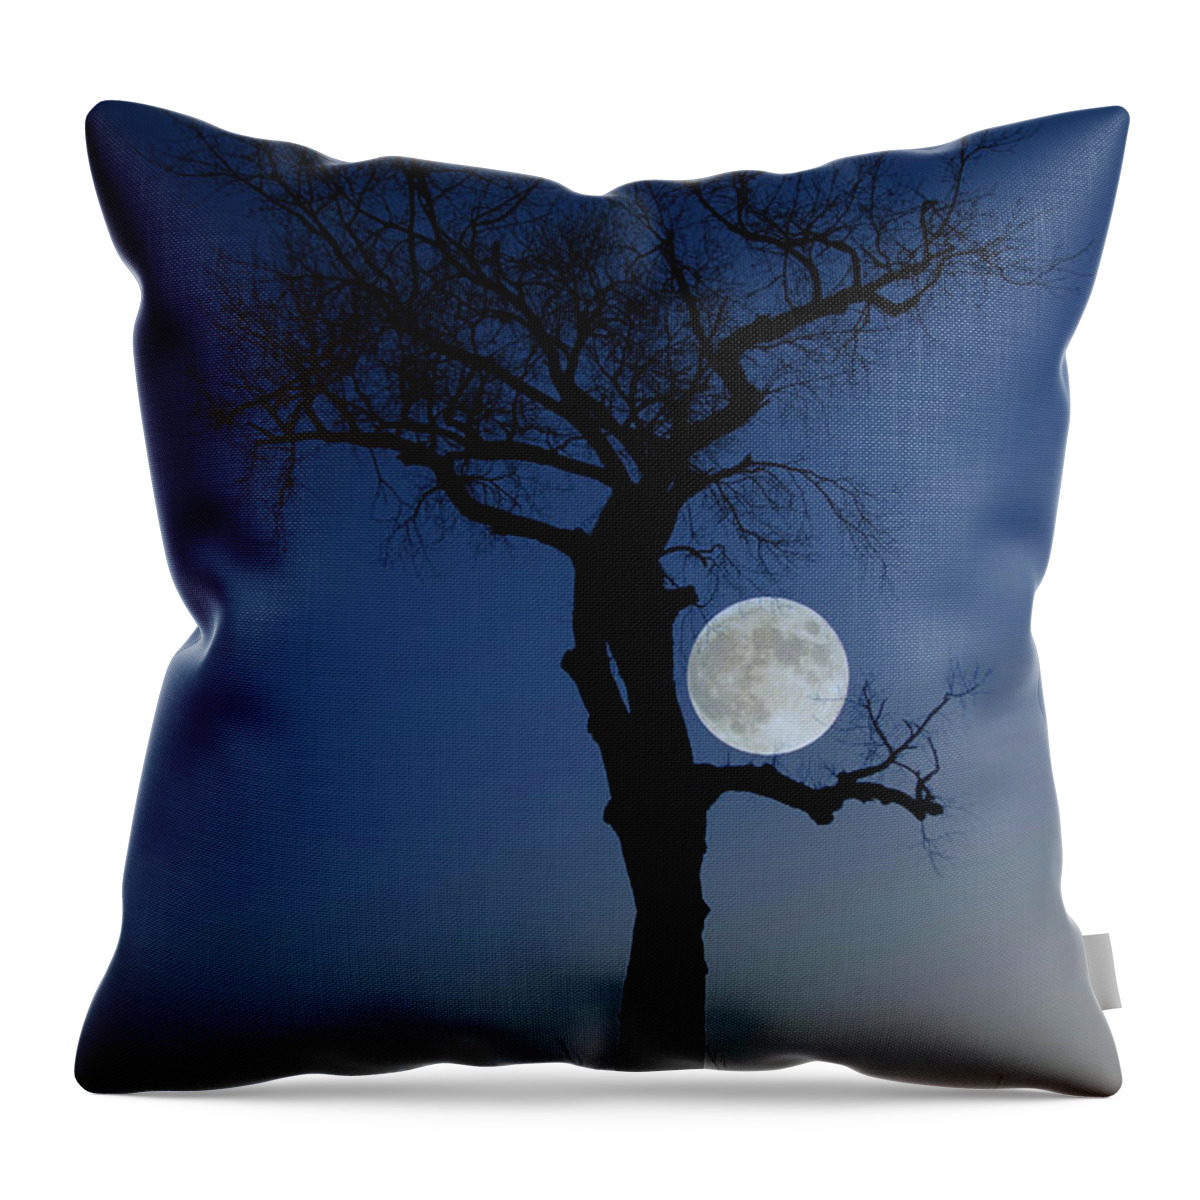 Frost Moon Throw Pillow featuring the photograph Idiosyncrasy by Aaron J Groen